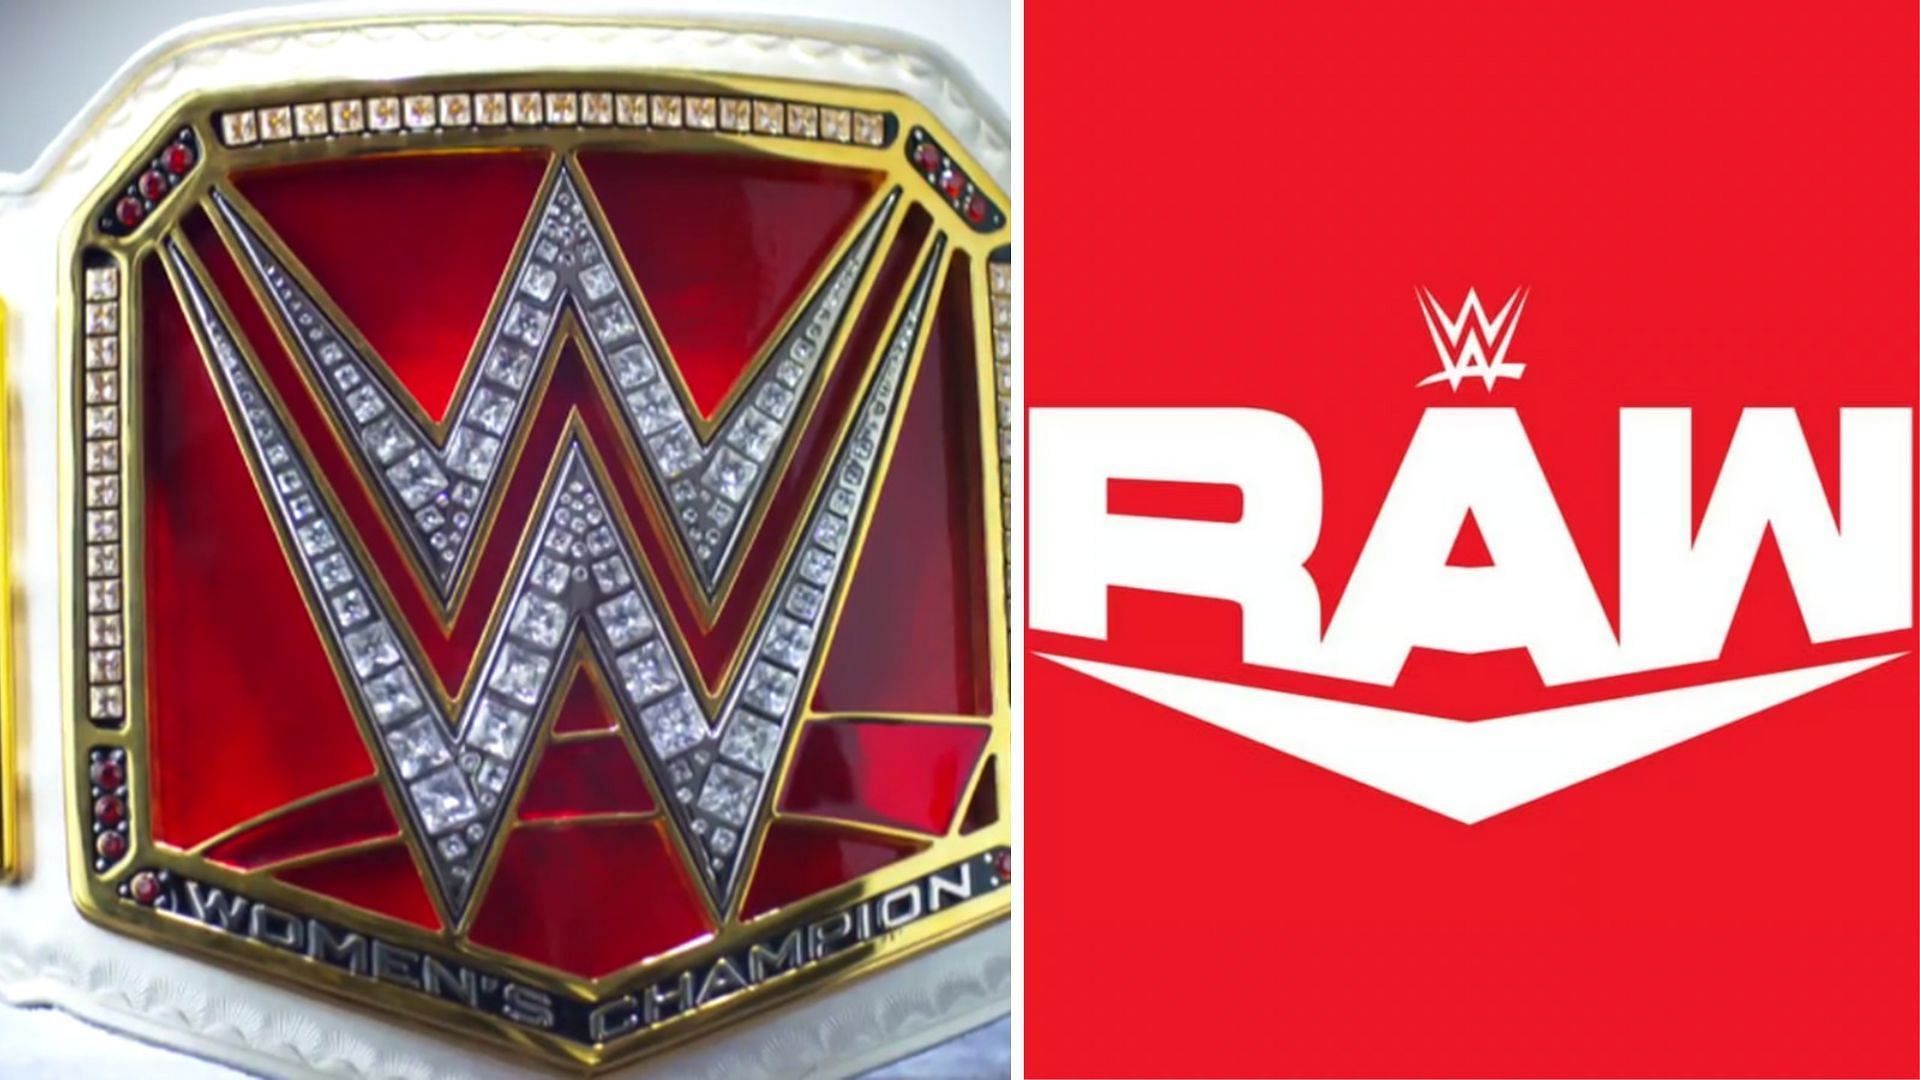 A former champion is set for an interesting storyline on WWE RAW. 